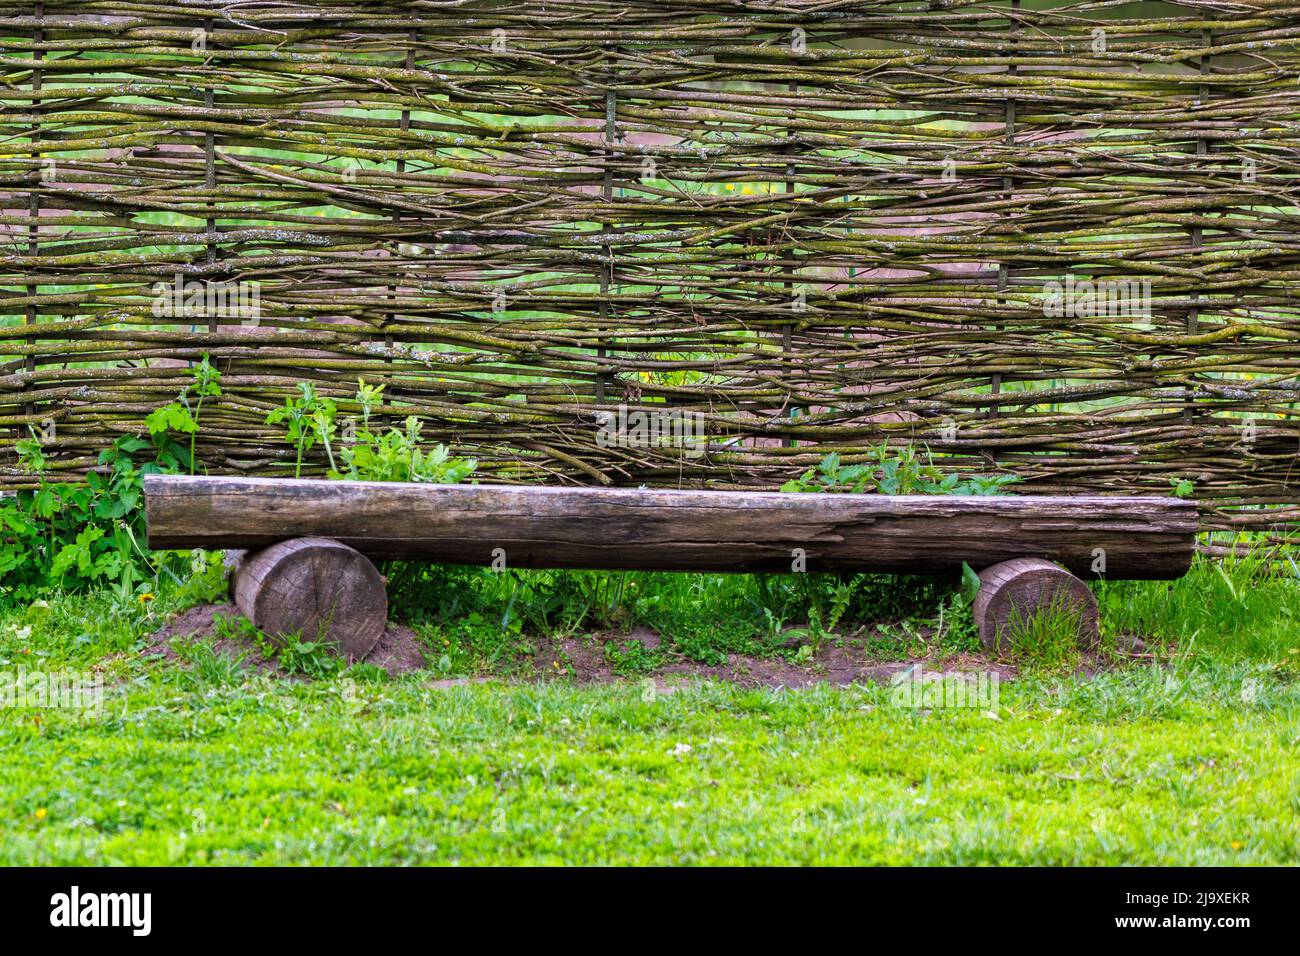 horizontal wattle fence with wooden bench near Stock Photo